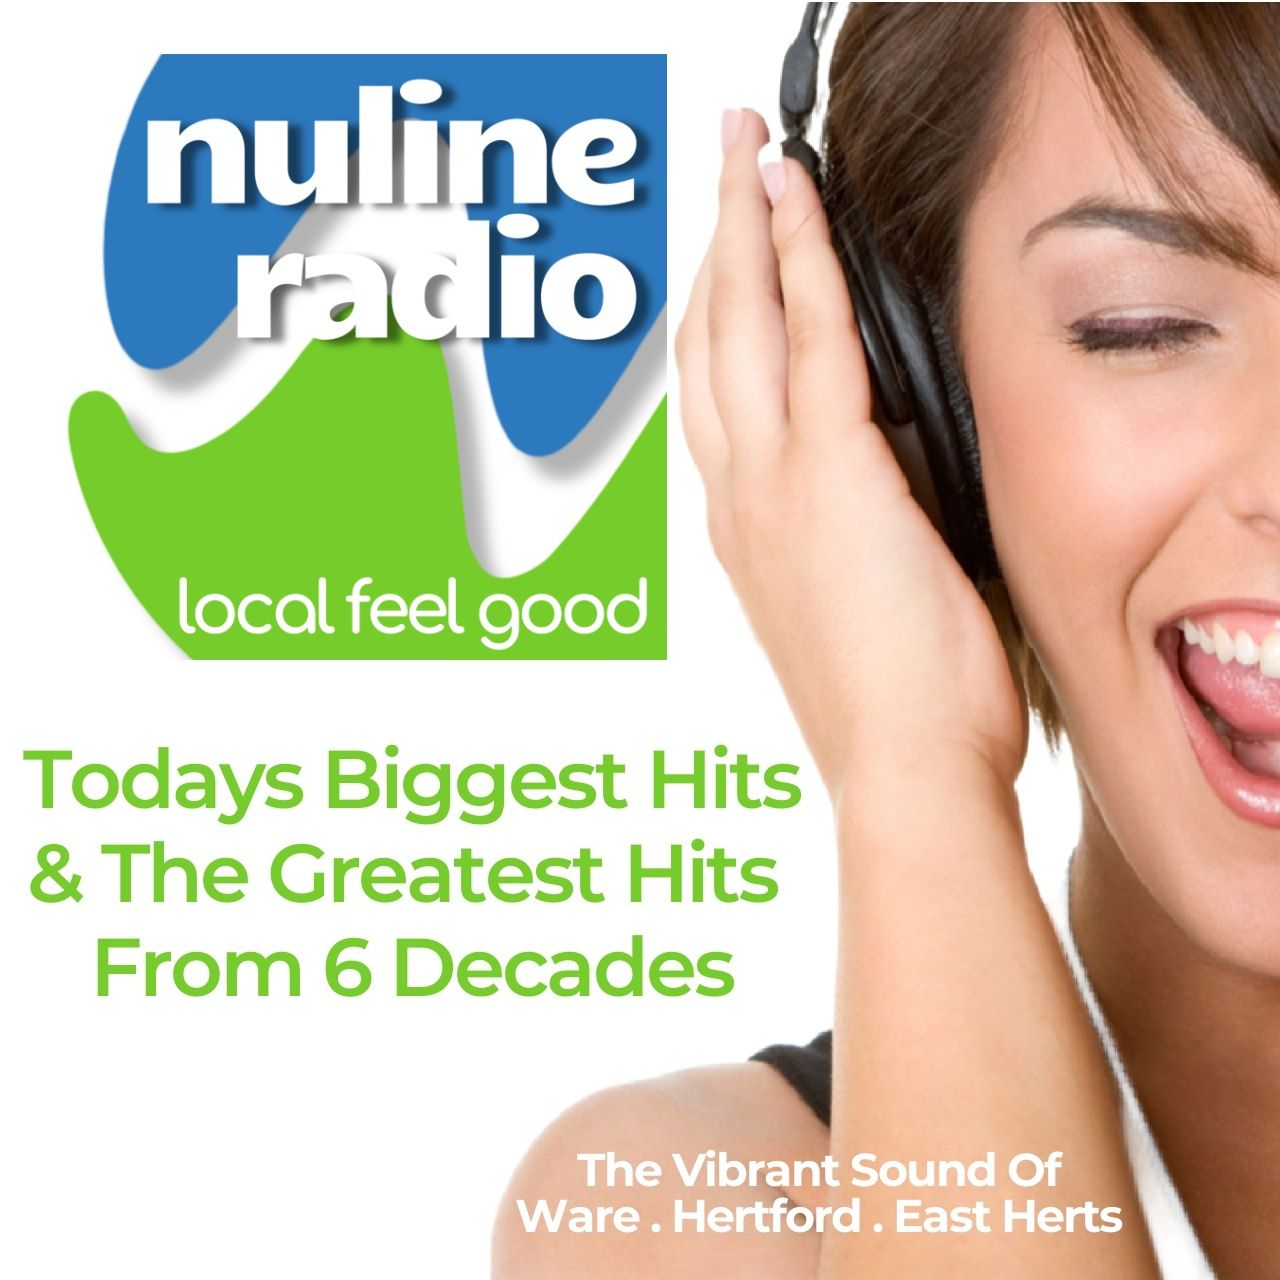 female_wearing_red_tshirt_holding_headphones_nuline_radio_logo_playing_the_greatest_hits_from_across_the_years_640_x_640.jpg